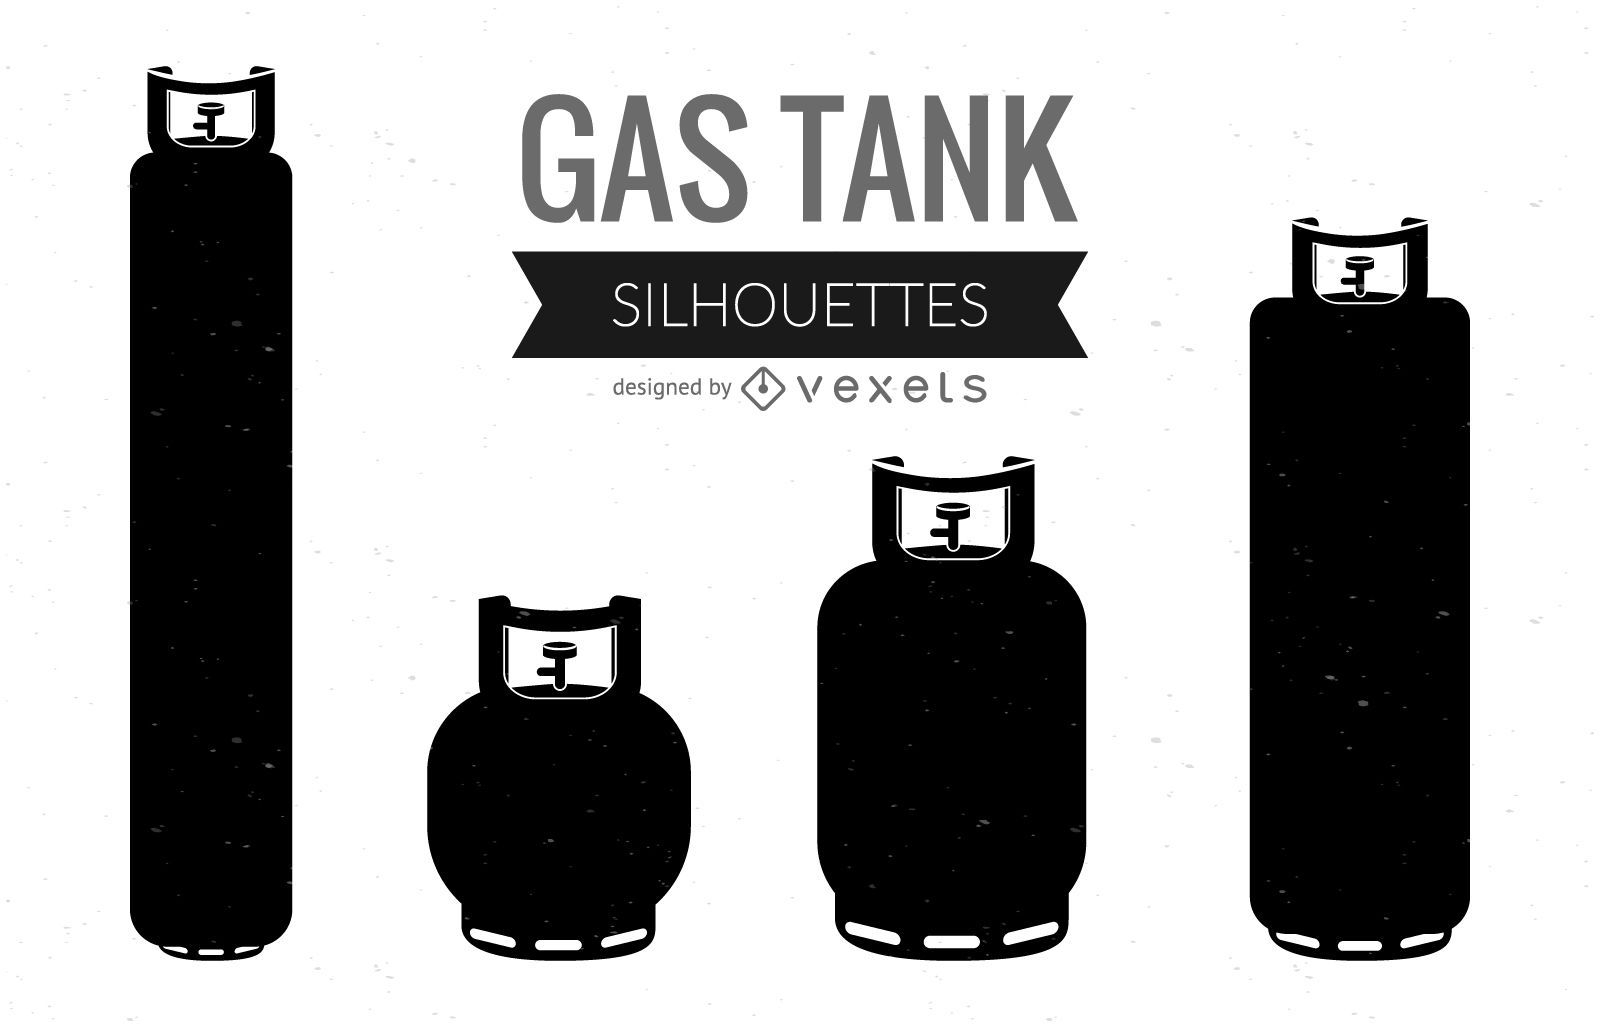 Illustrated gas tank silhouettes